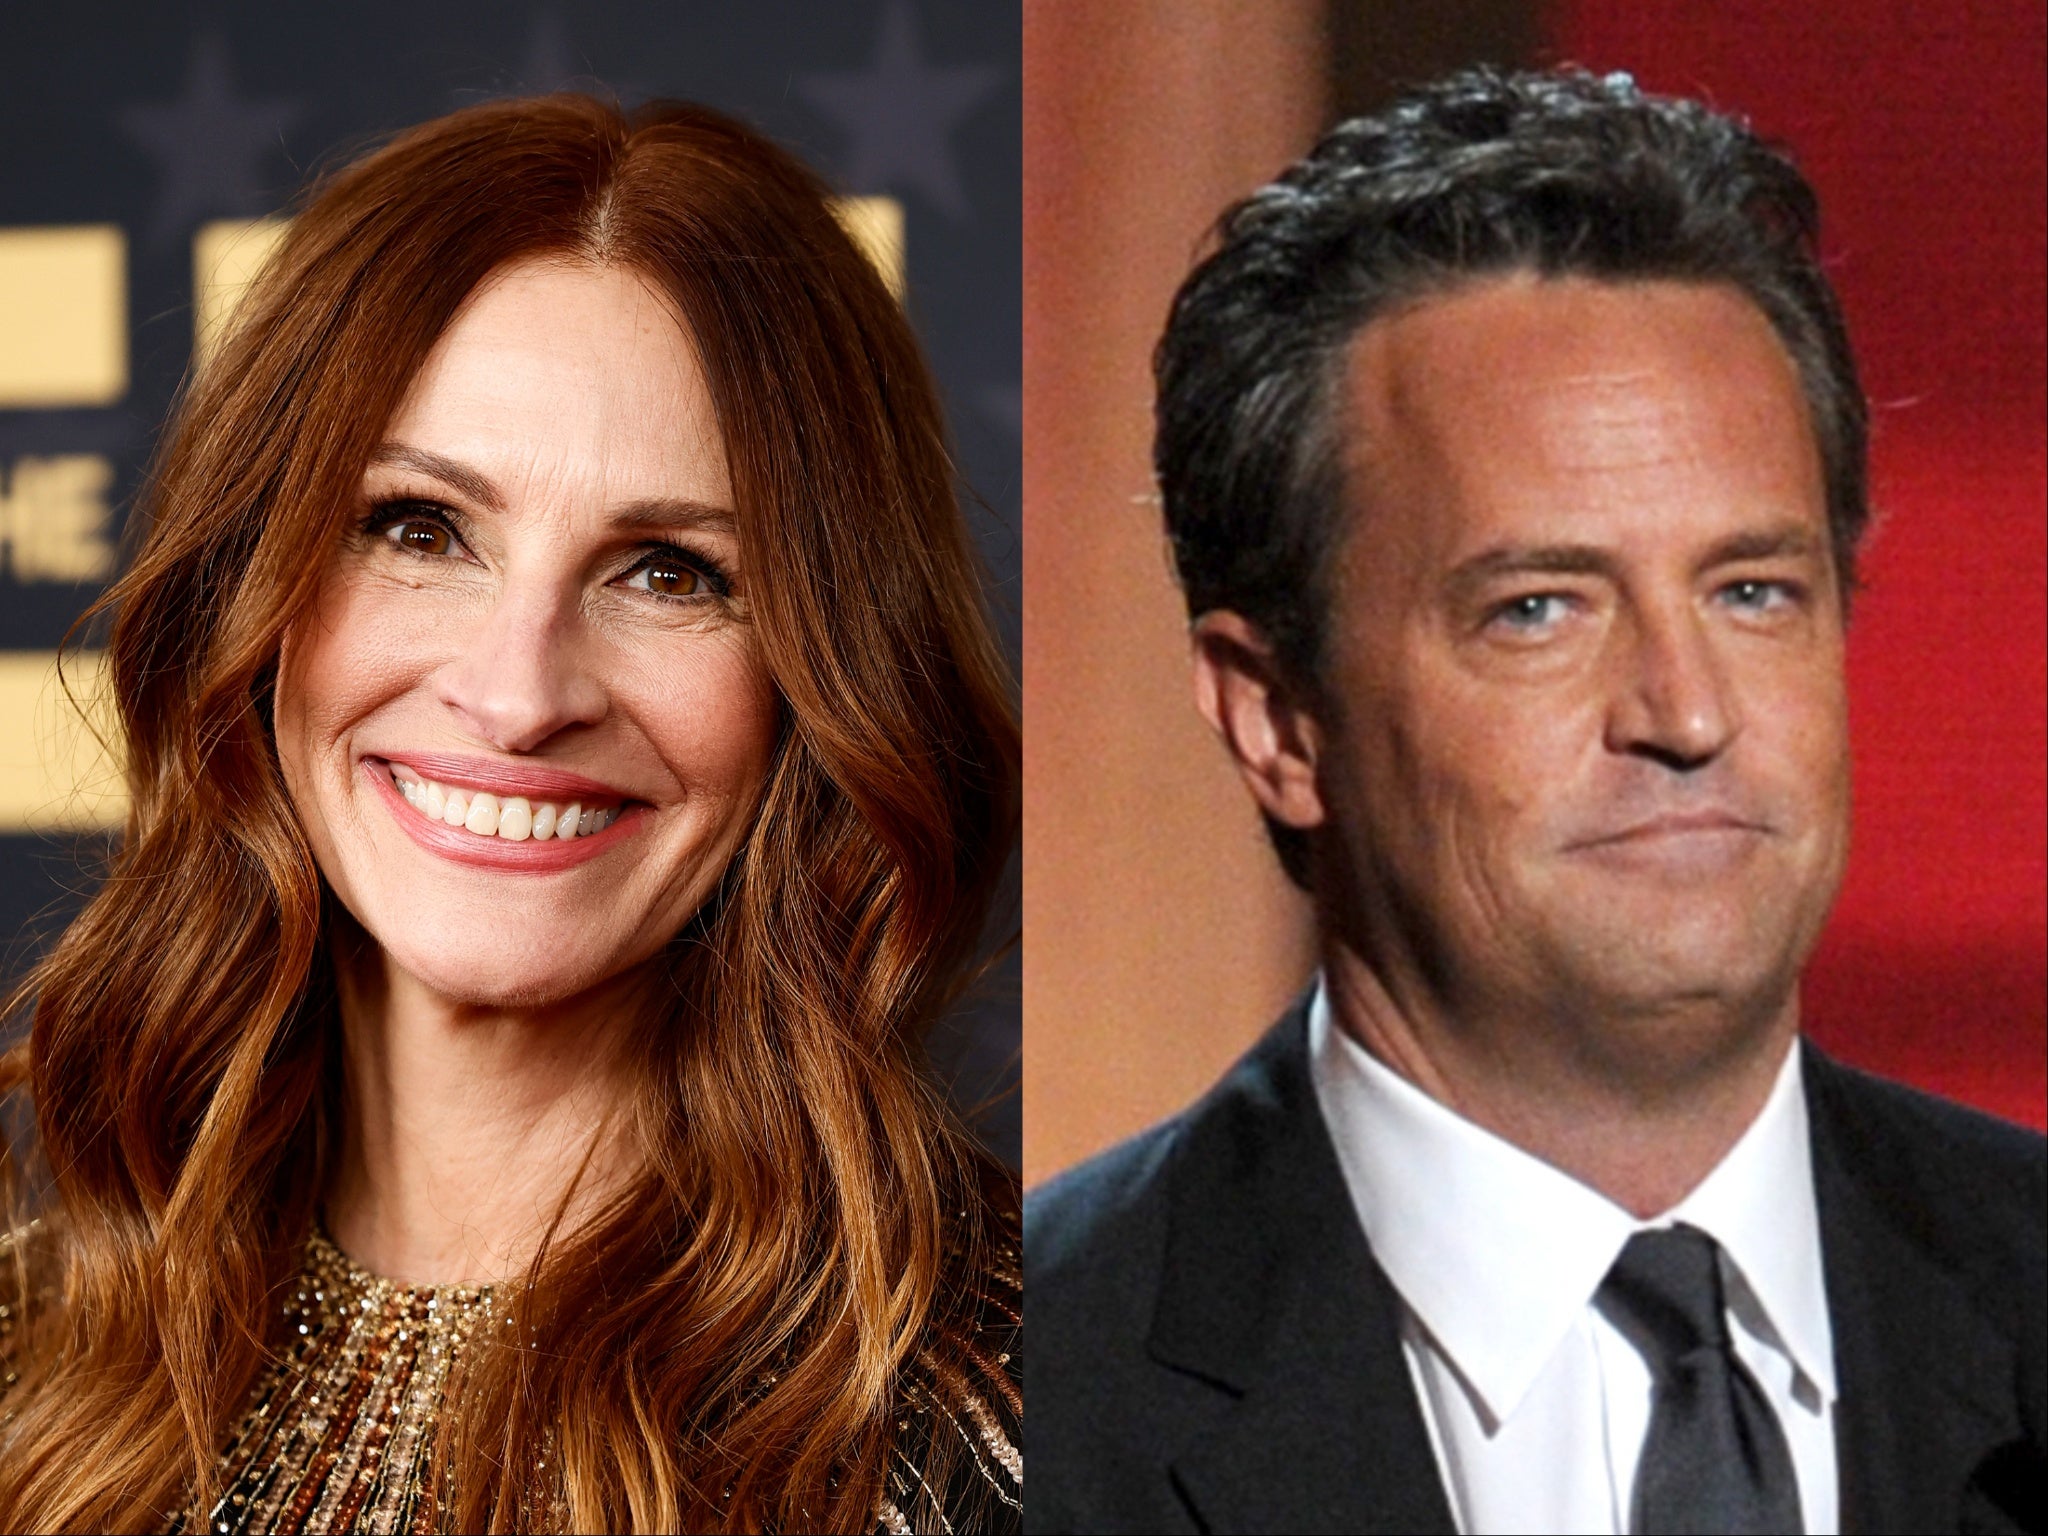 Julia Roberts has paid tribute to Matthew Perry